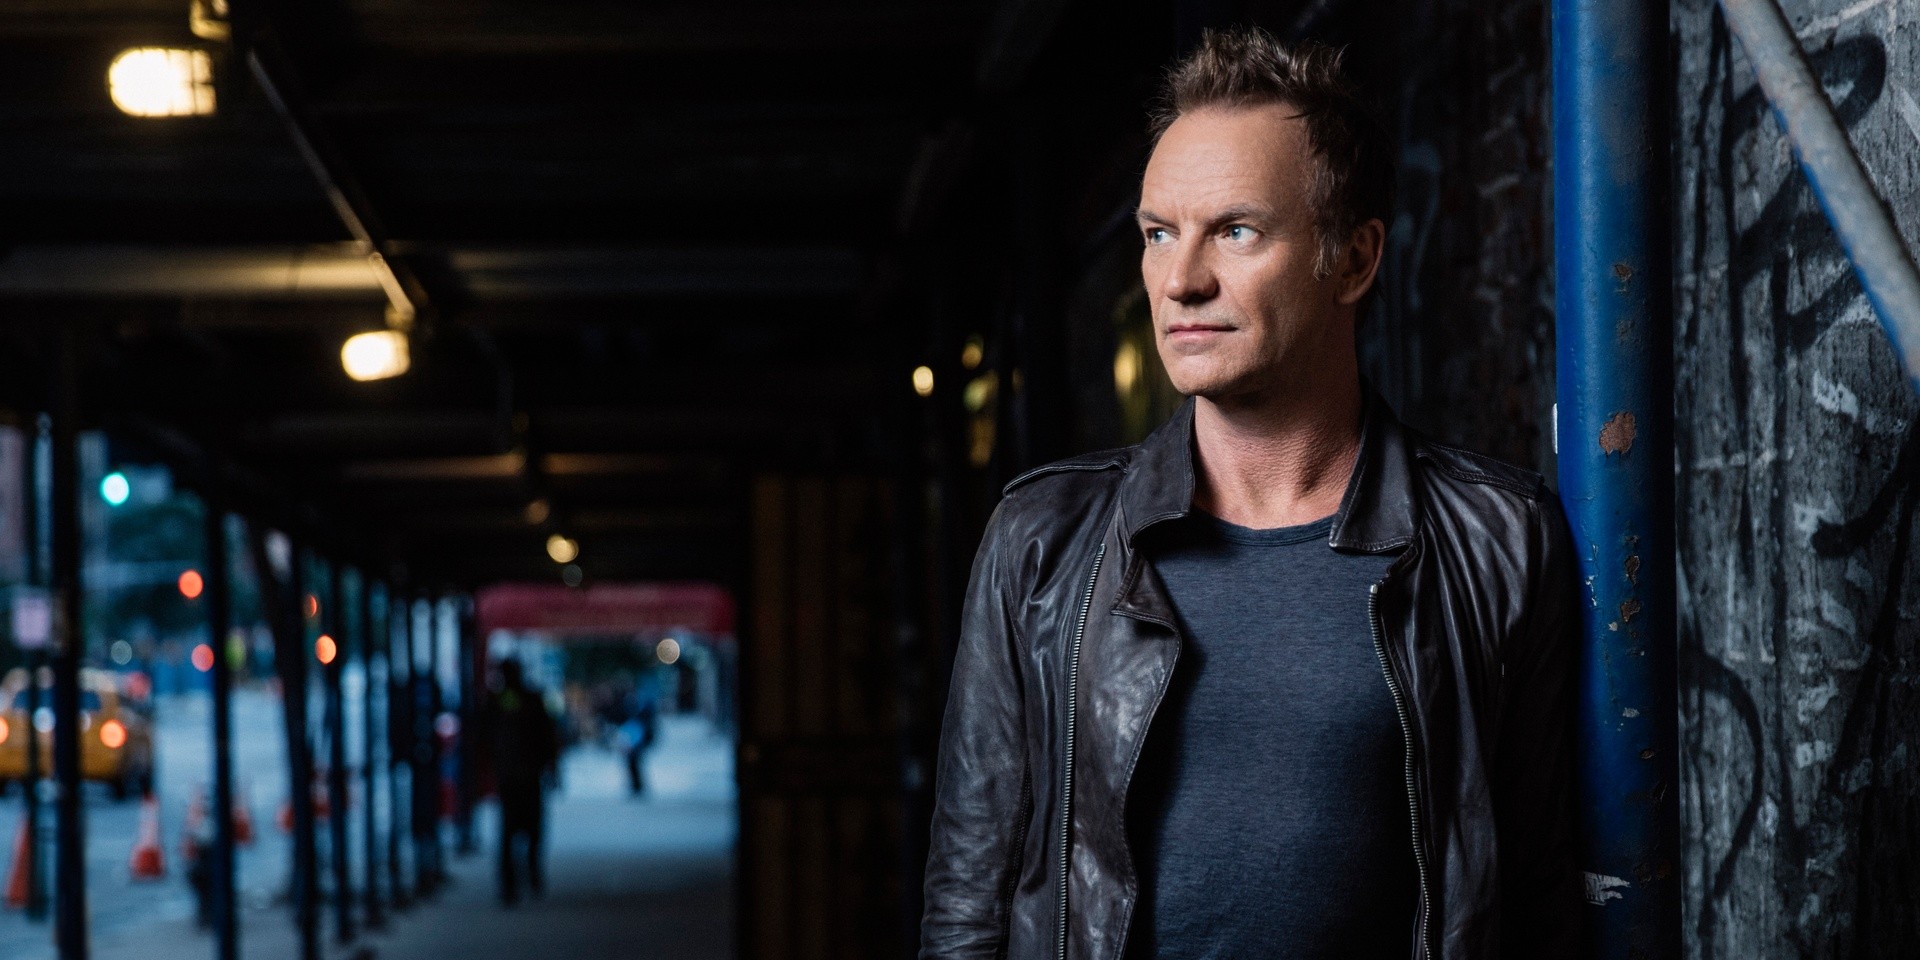 Sting's Manila concert has been canceled